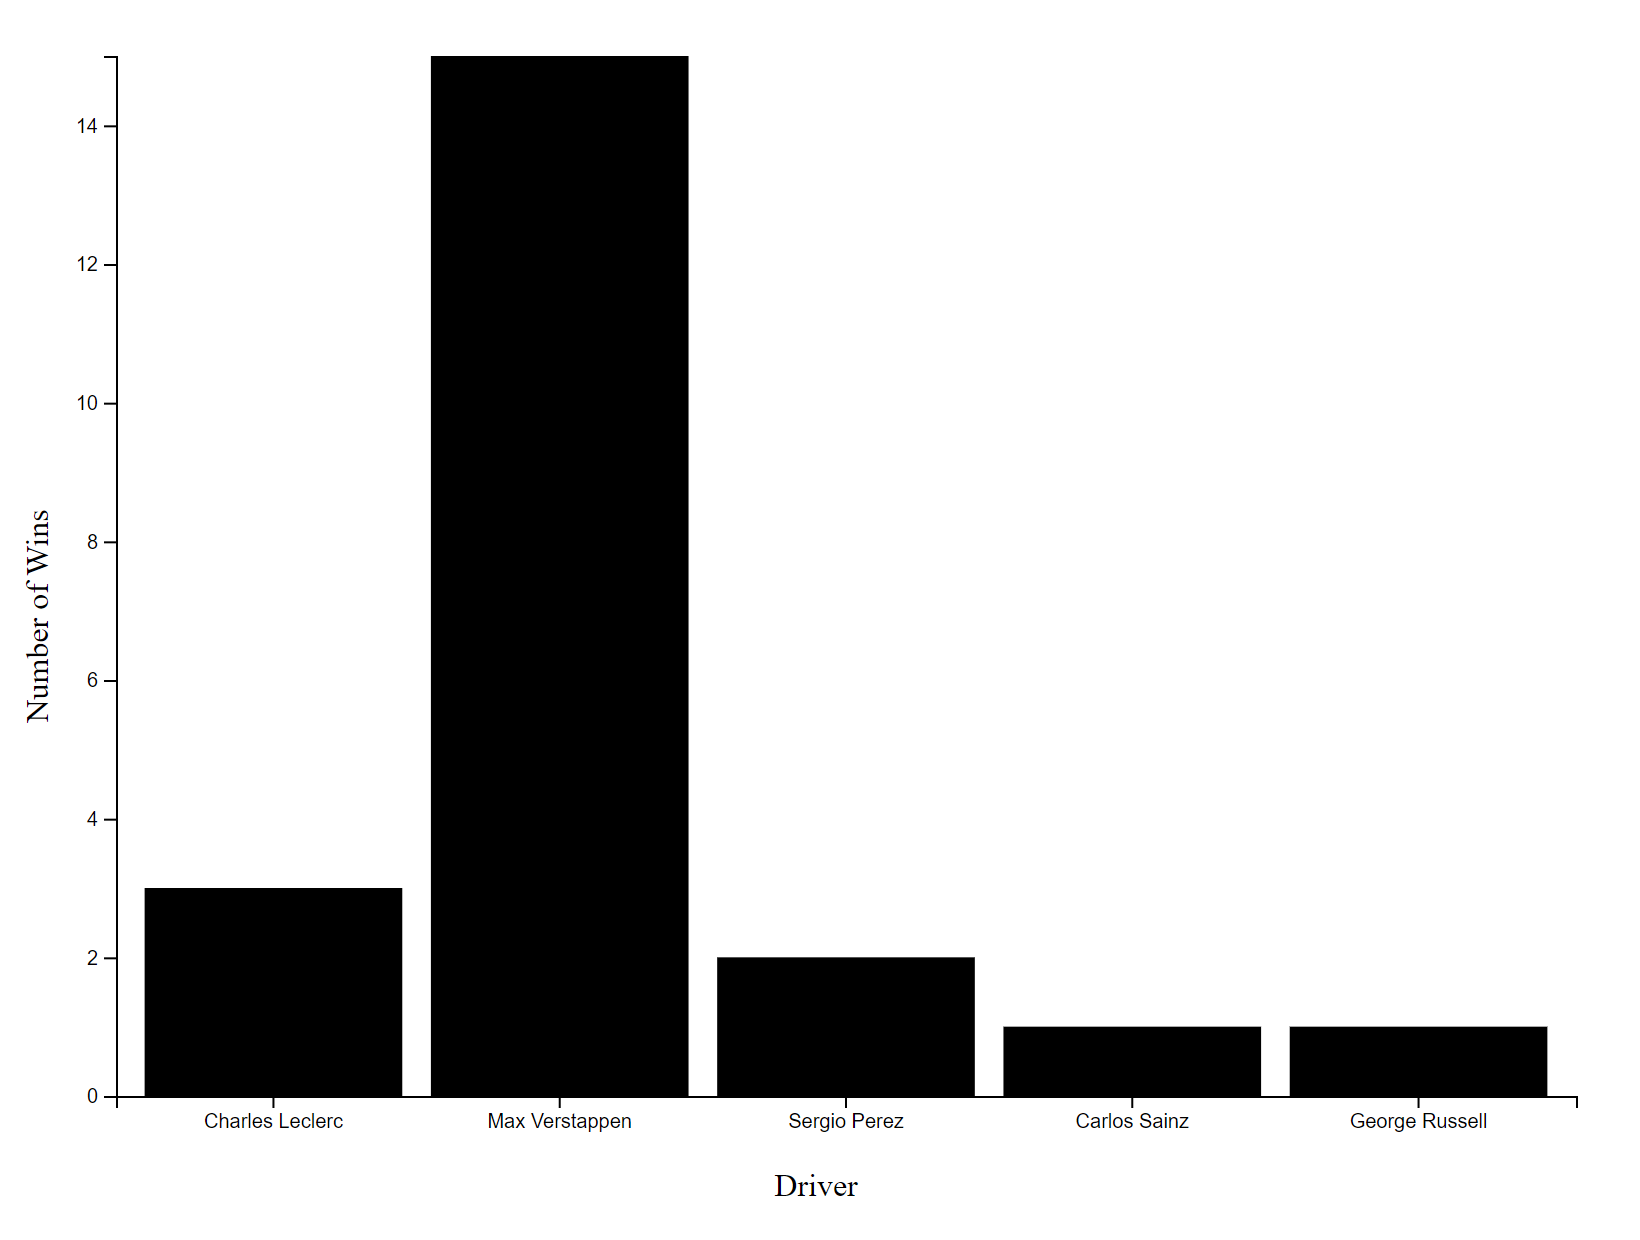 bar chart with the x-axis labeled "Driver" and the y-axis labeled "Number of Wins", containing five black bars labeled with driver names, and with clear labels for values on the y-axis